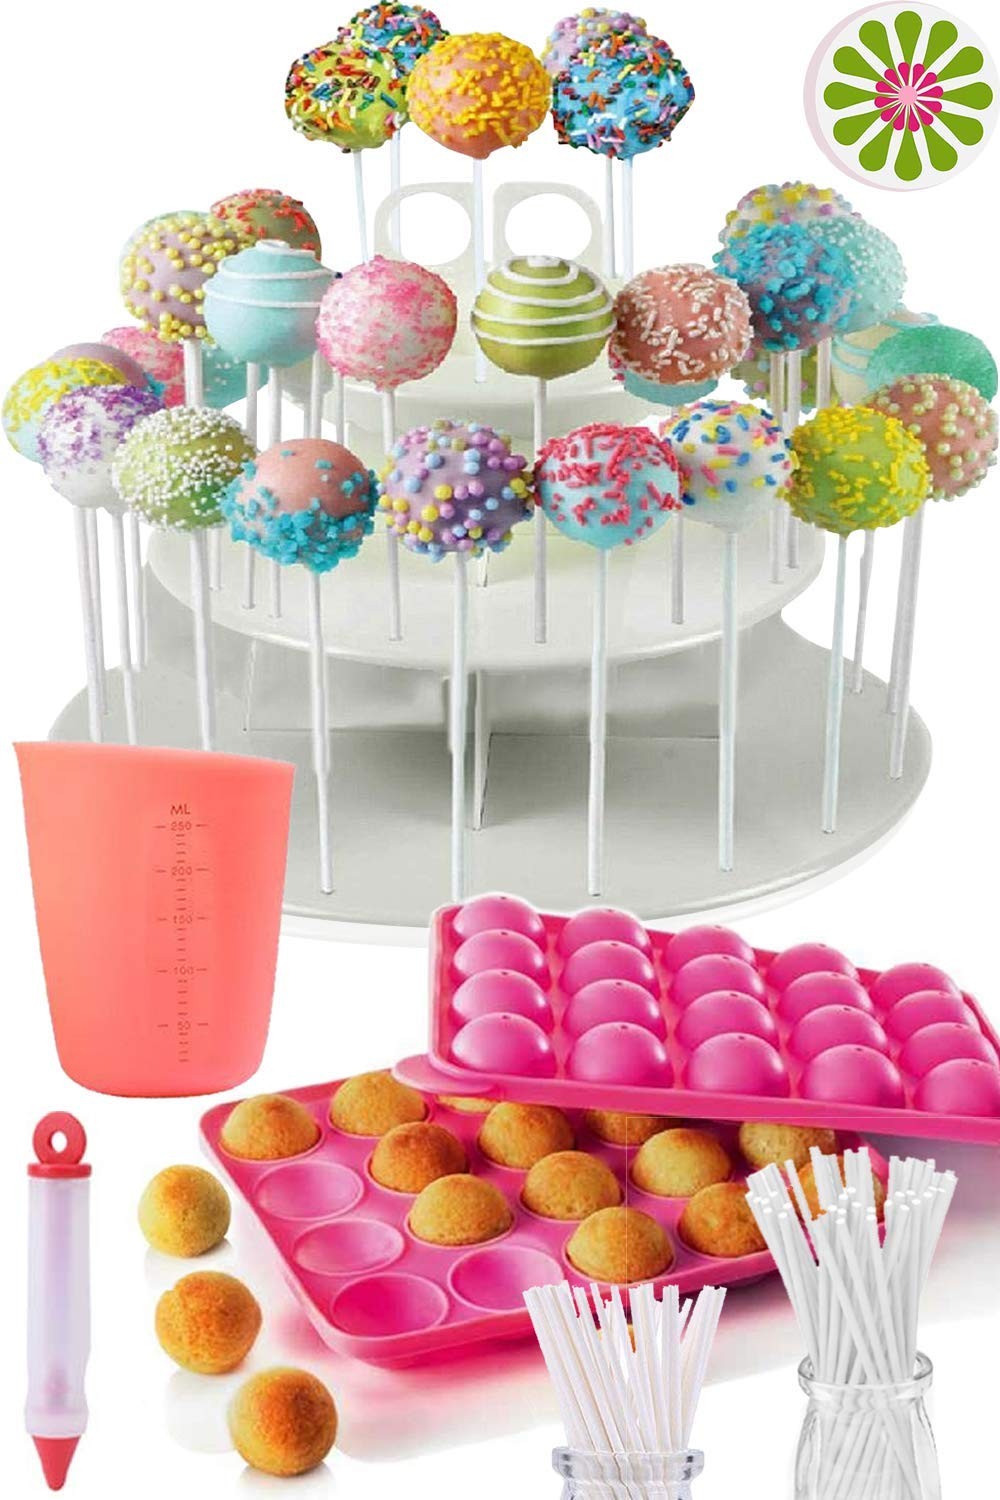 Cake Pop Kit by Baketivity | No Cake Pop Mold or Maker Needed | Cake Pop  Stand and Baking Kit | Arts and Crafts for Kids Baking Sets | Kosher